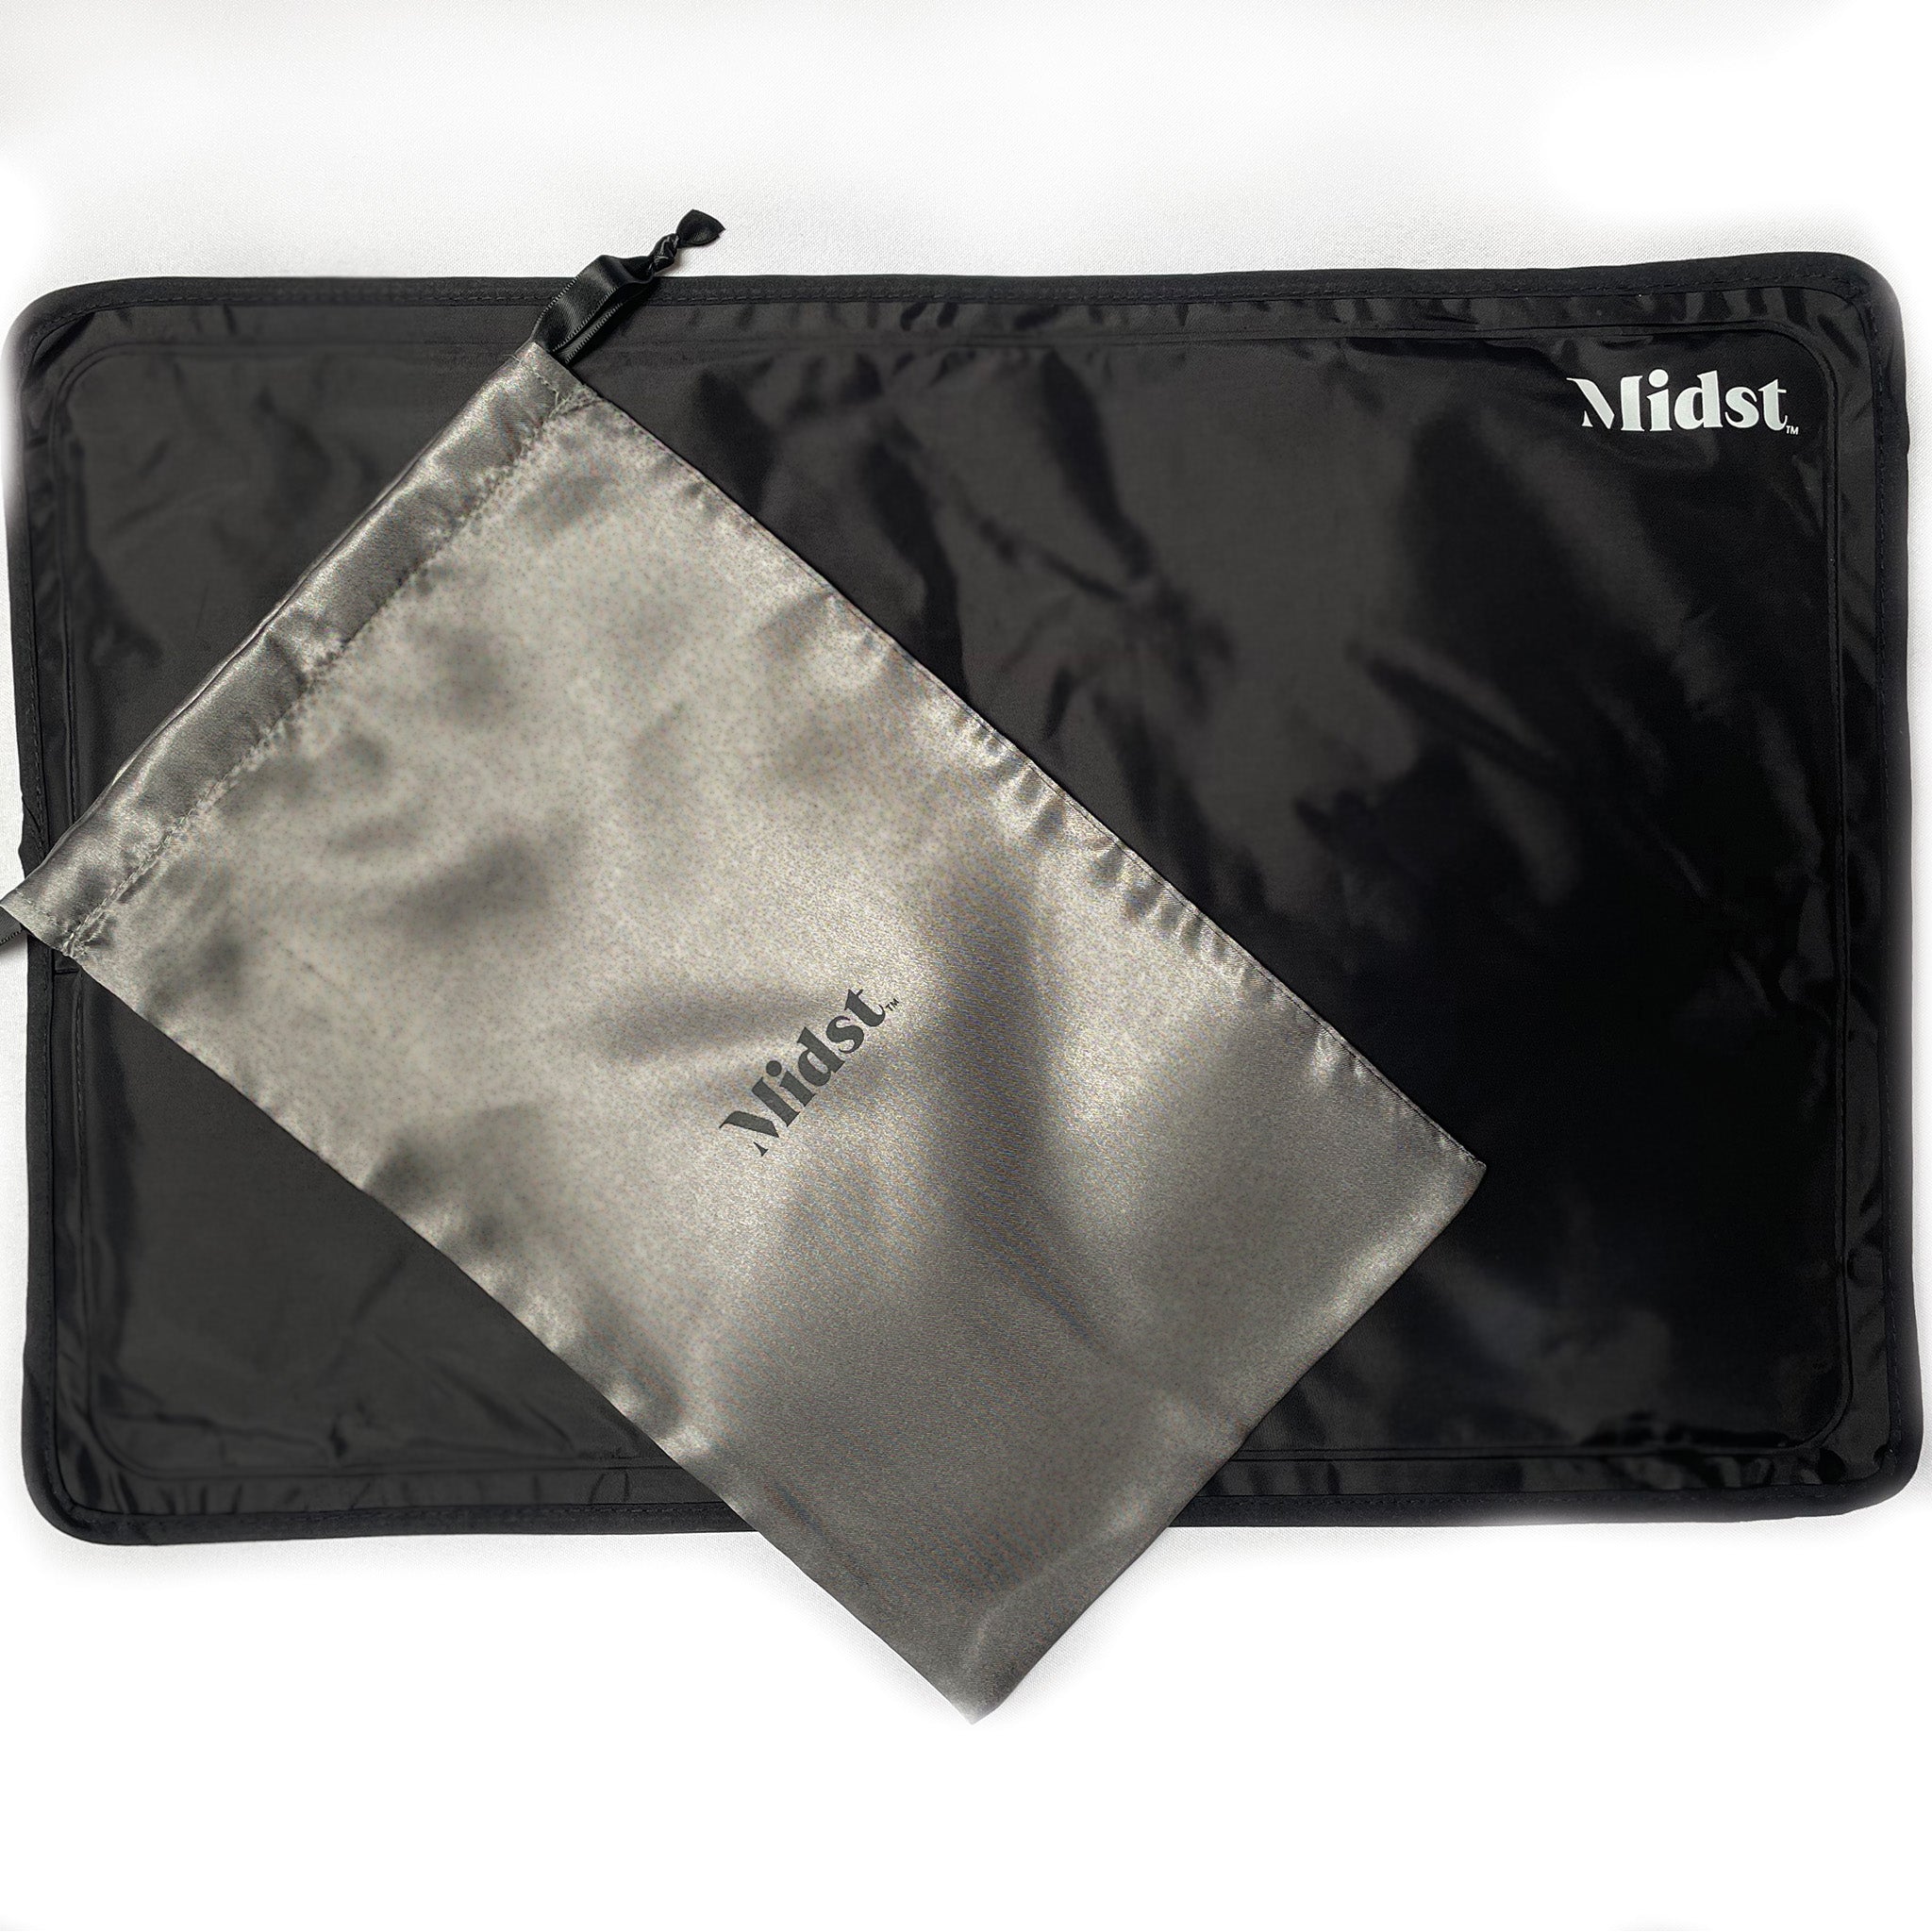 Midst Hot Flush Cooling Gel Pillow. Black flat PVC Pillow lying flat, with grey satin ouch sitting on top.